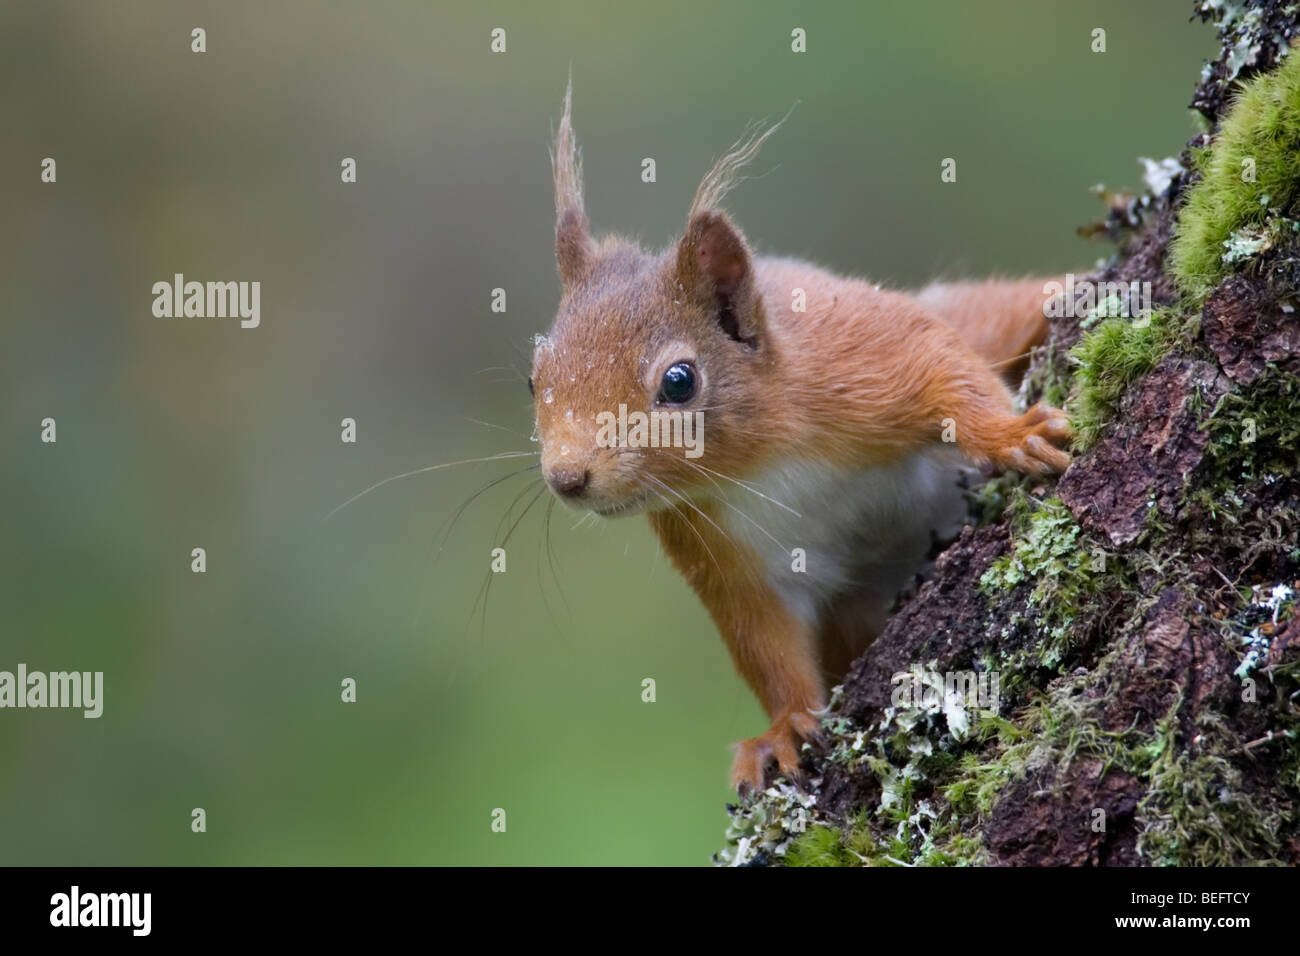 Cheeky red squirrel peering around a lichen covered tree trunk. Stock Photo